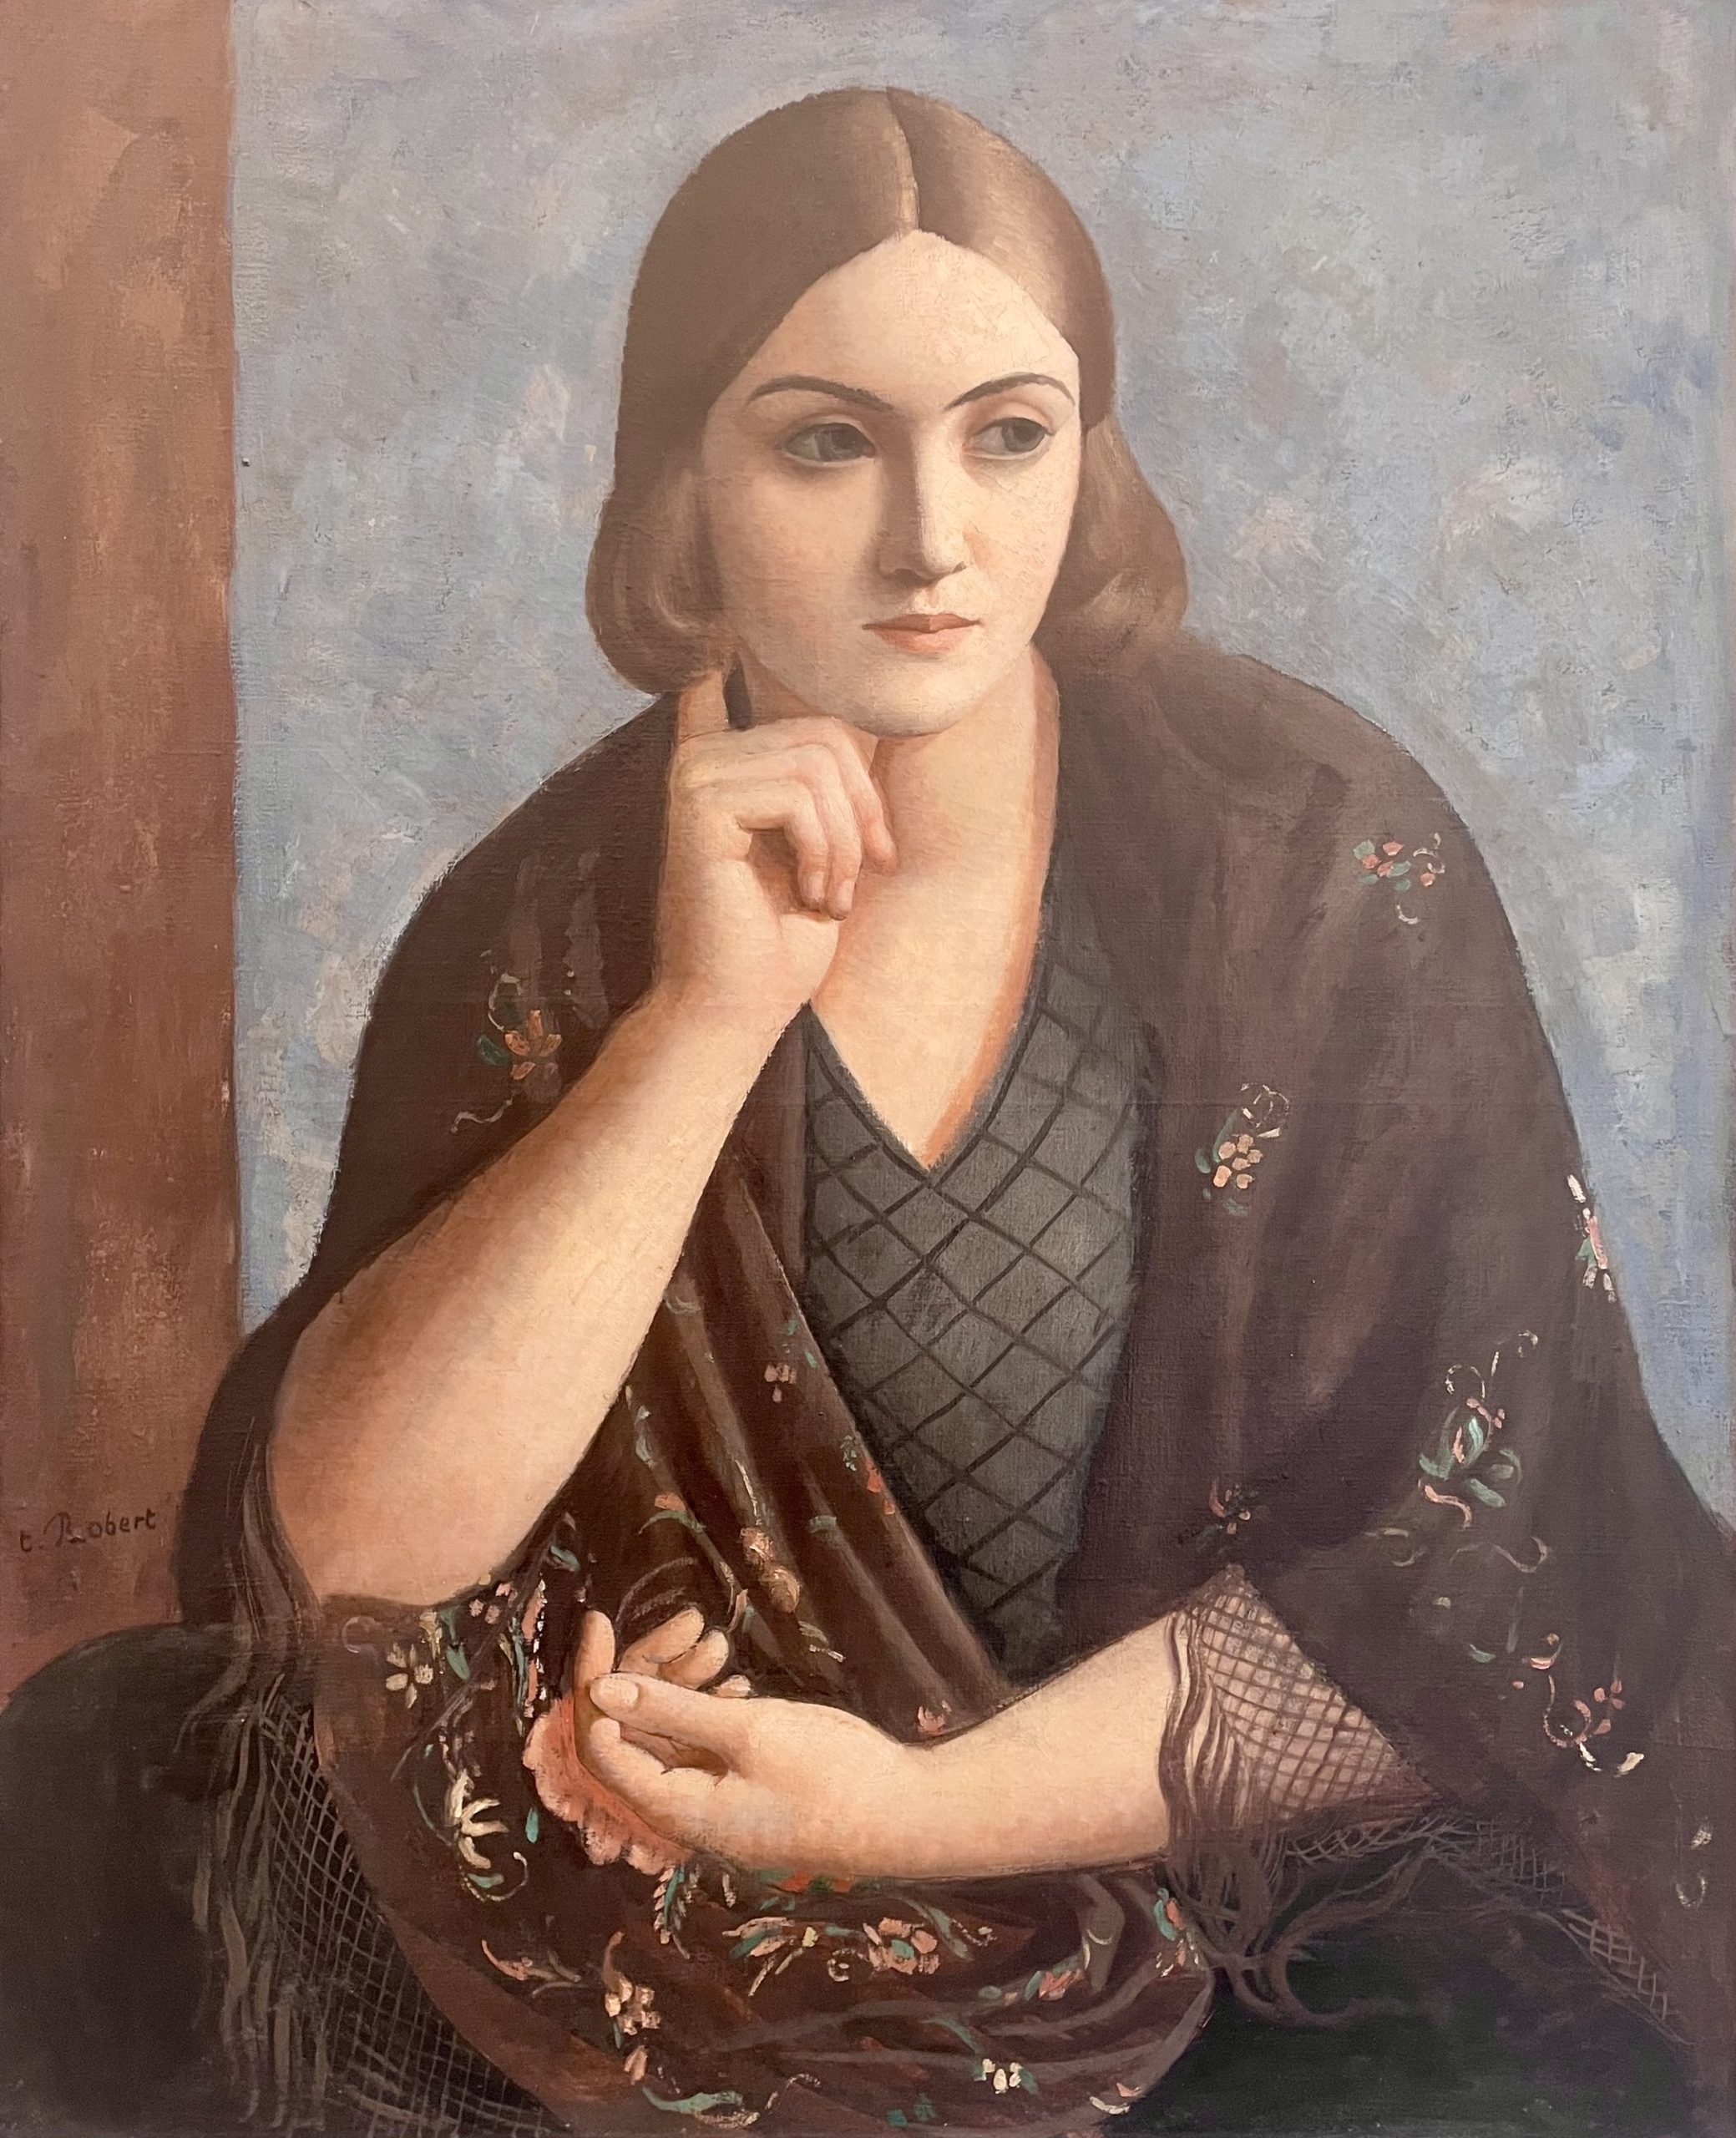 Théophile Robert, oli on canvas, signed, from 1921, published, 65 x 80 cm